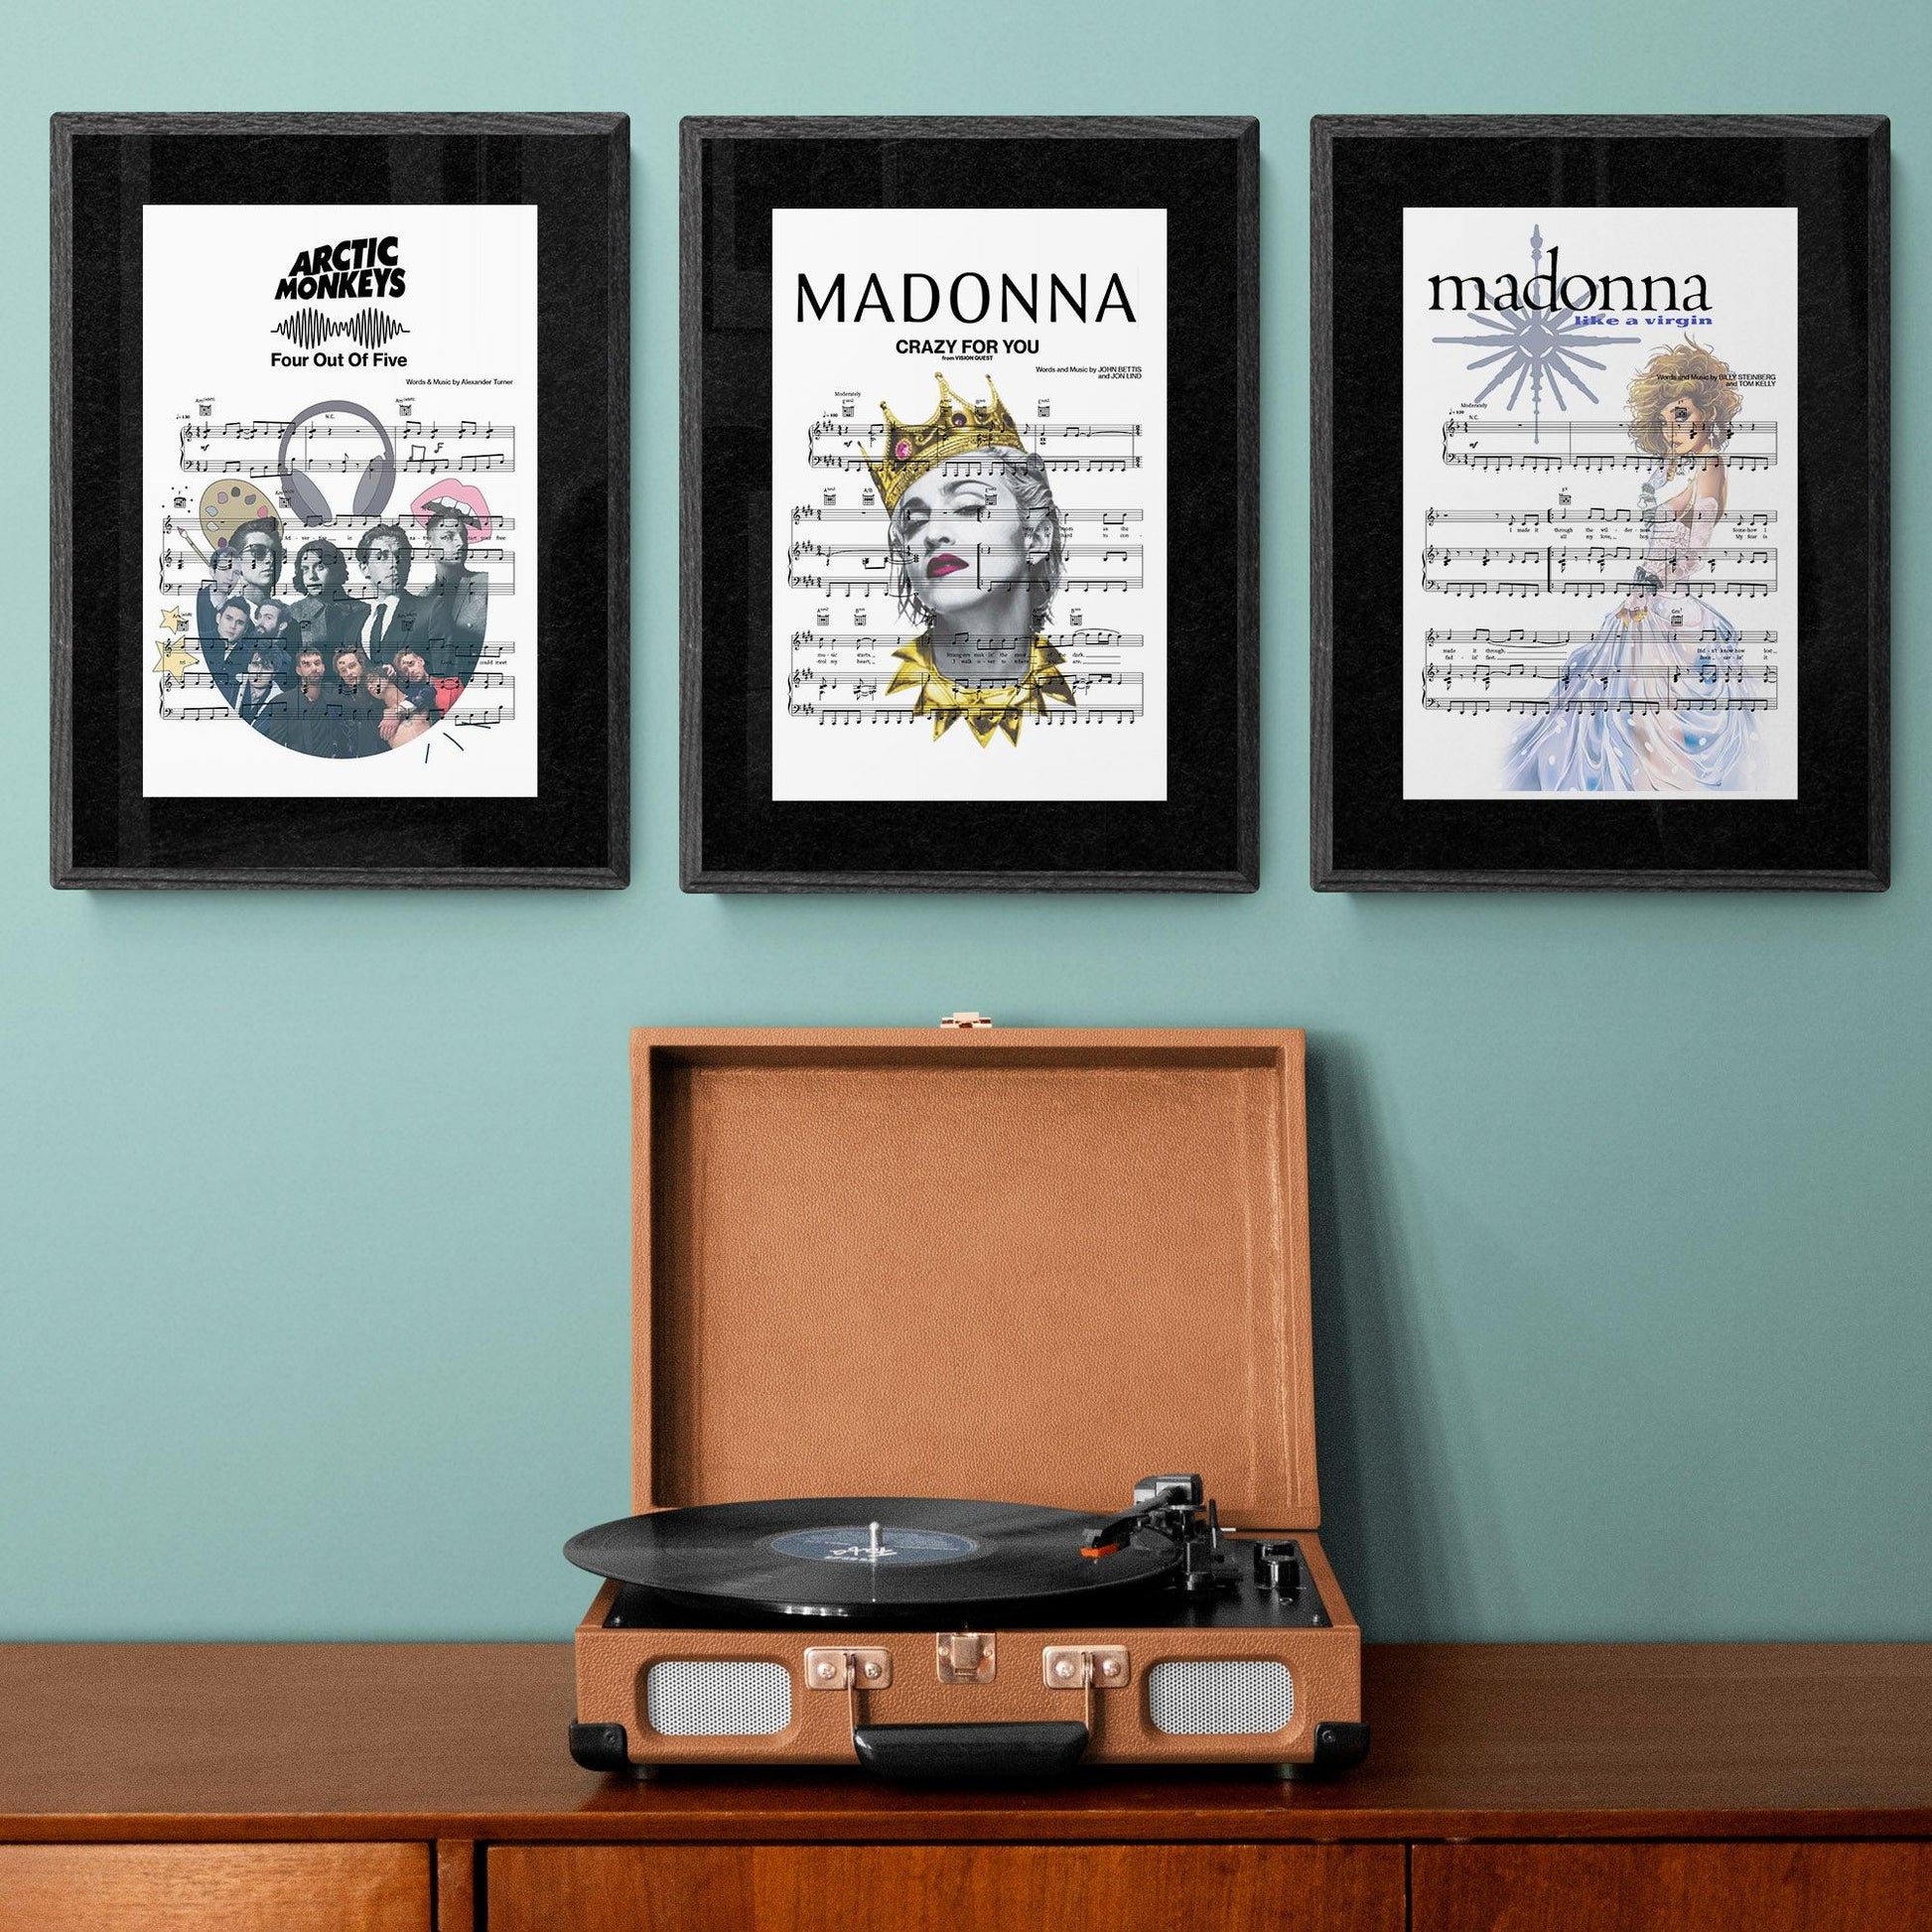 Madonna - Crazy For You Song Print | Song Music Sheet Notes Print Everyone has a favorite song especially Madonna Print, and now you can show the score as printed staff. The personal favorite song sheet print shows the song chosen as the score. 